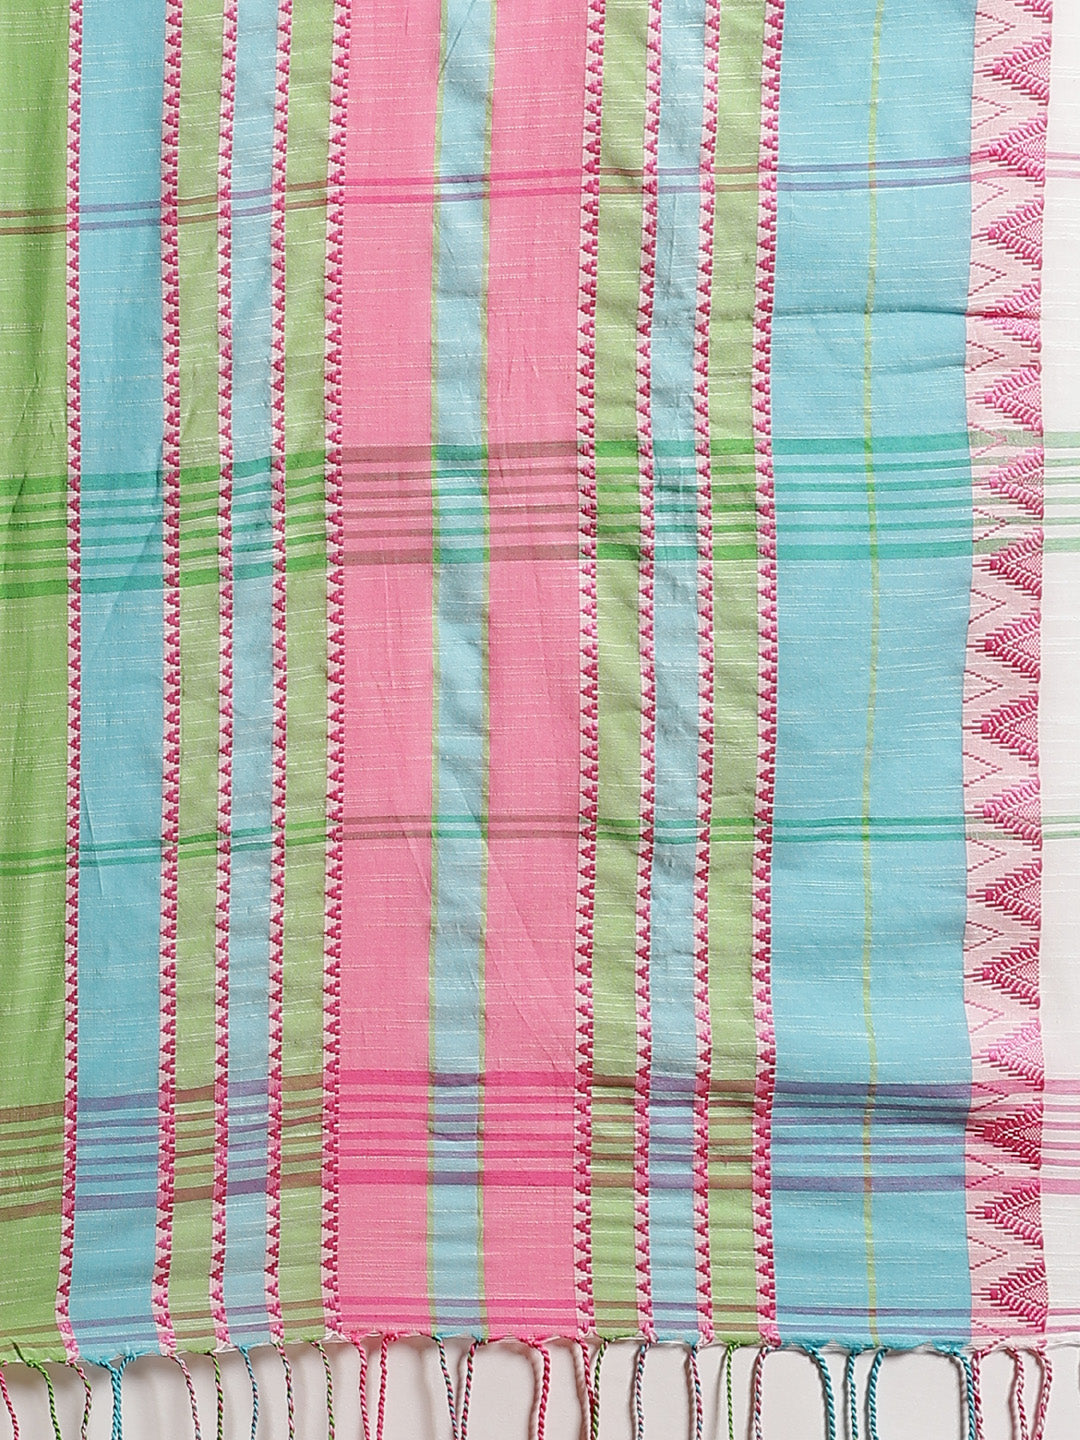 Pink and Blue, Kalakari India Cotton Pink Hand crafted saree with blouse SHBESA0005-Saree-Kalakari India-SHBESA0005-Begumpuri, Bengal, Cotton, Geographical Indication, Hand Crafted, Heritage Prints, Natural Dyes, Red, Sarees, Sustainable Fabrics, Woven, Yellow-[Linen,Ethnic,wear,Fashionista,Handloom,Handicraft,Indigo,blockprint,block,print,Cotton,Chanderi,Blue, latest,classy,party,bollywood,trendy,summer,style,traditional,formal,elegant,unique,style,hand,block,print, dabu,booti,gift,present,glam